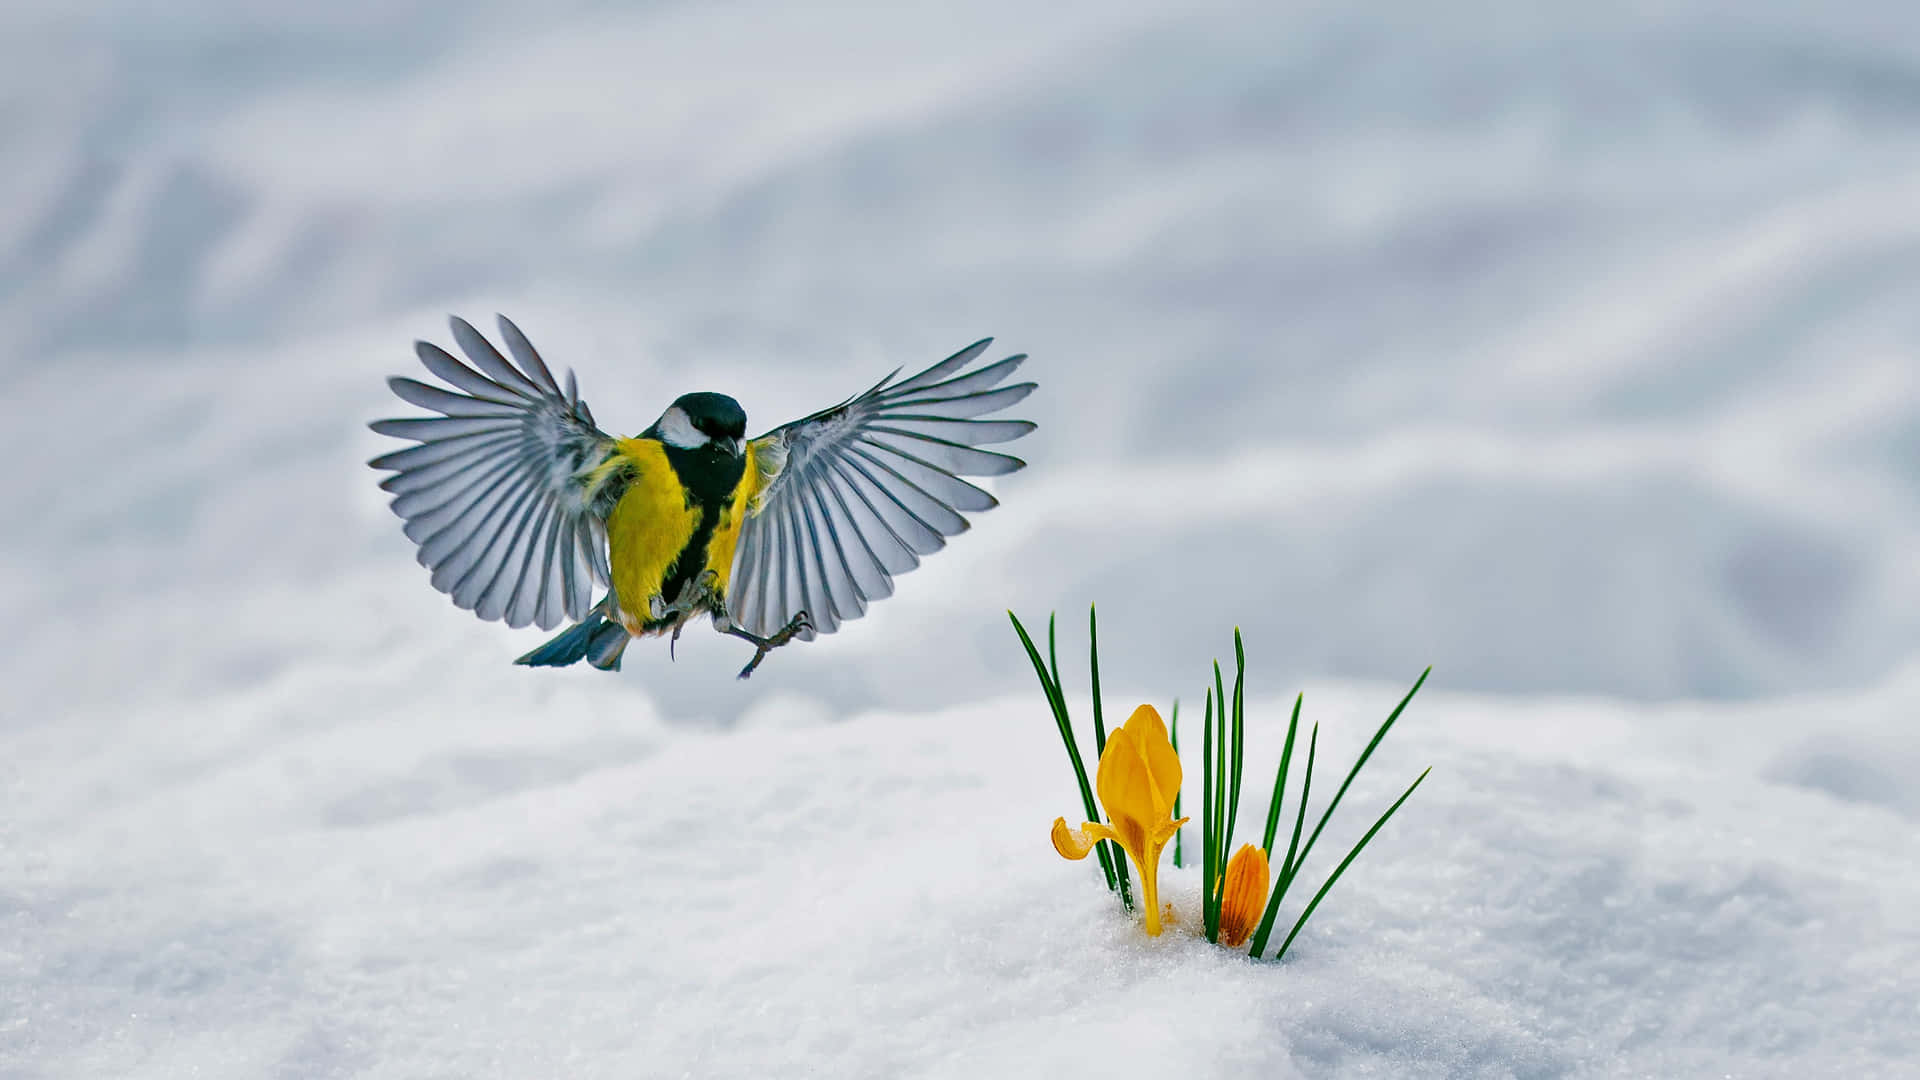 Great Tit In Flight Over Snowy Crocuses Background